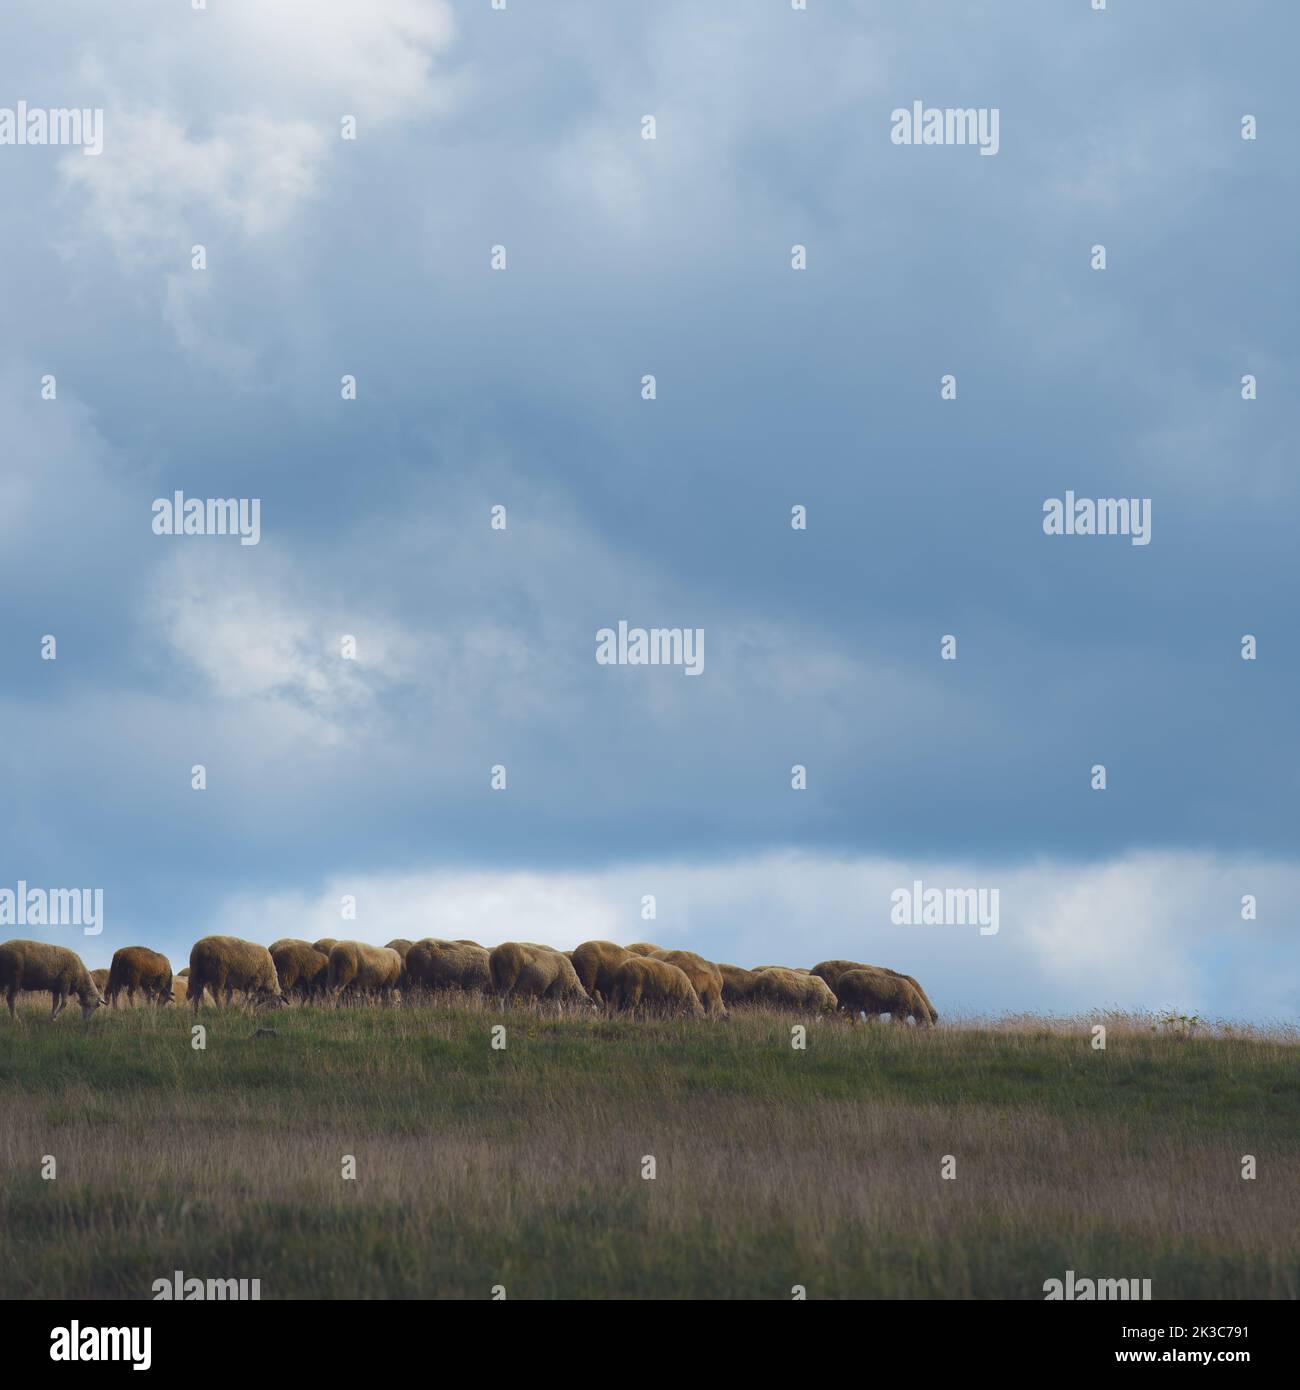 Flock of sheep is grazing on pasture field on a free range dairy farm land in Zlatibor region, Serbia. Selective focus. Stock Photo